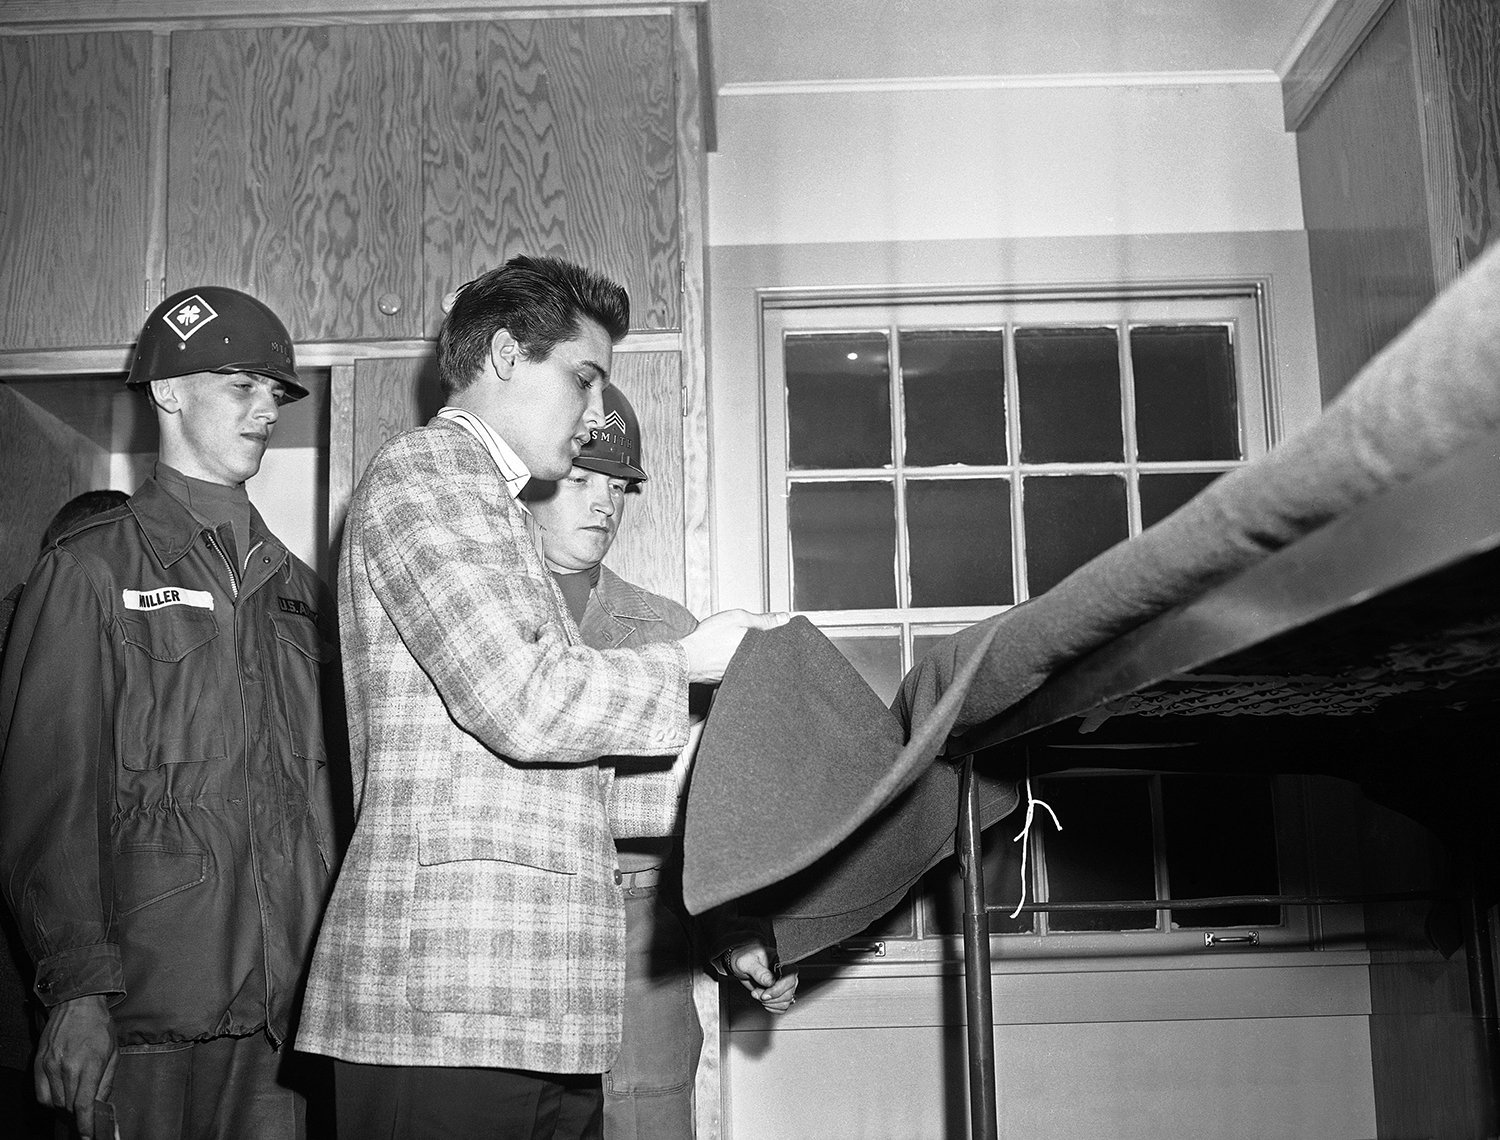  Under the watchful gaze of an instructor, Corporal John D. Smith, rock 'n' roll singer Elvis Presley adjusts a blanket on an upper bunk in Fort Chaffee, Ark. on March 25, 1958. Presley and 21 other recruits arrived from the Memphis, Tenn. induction 